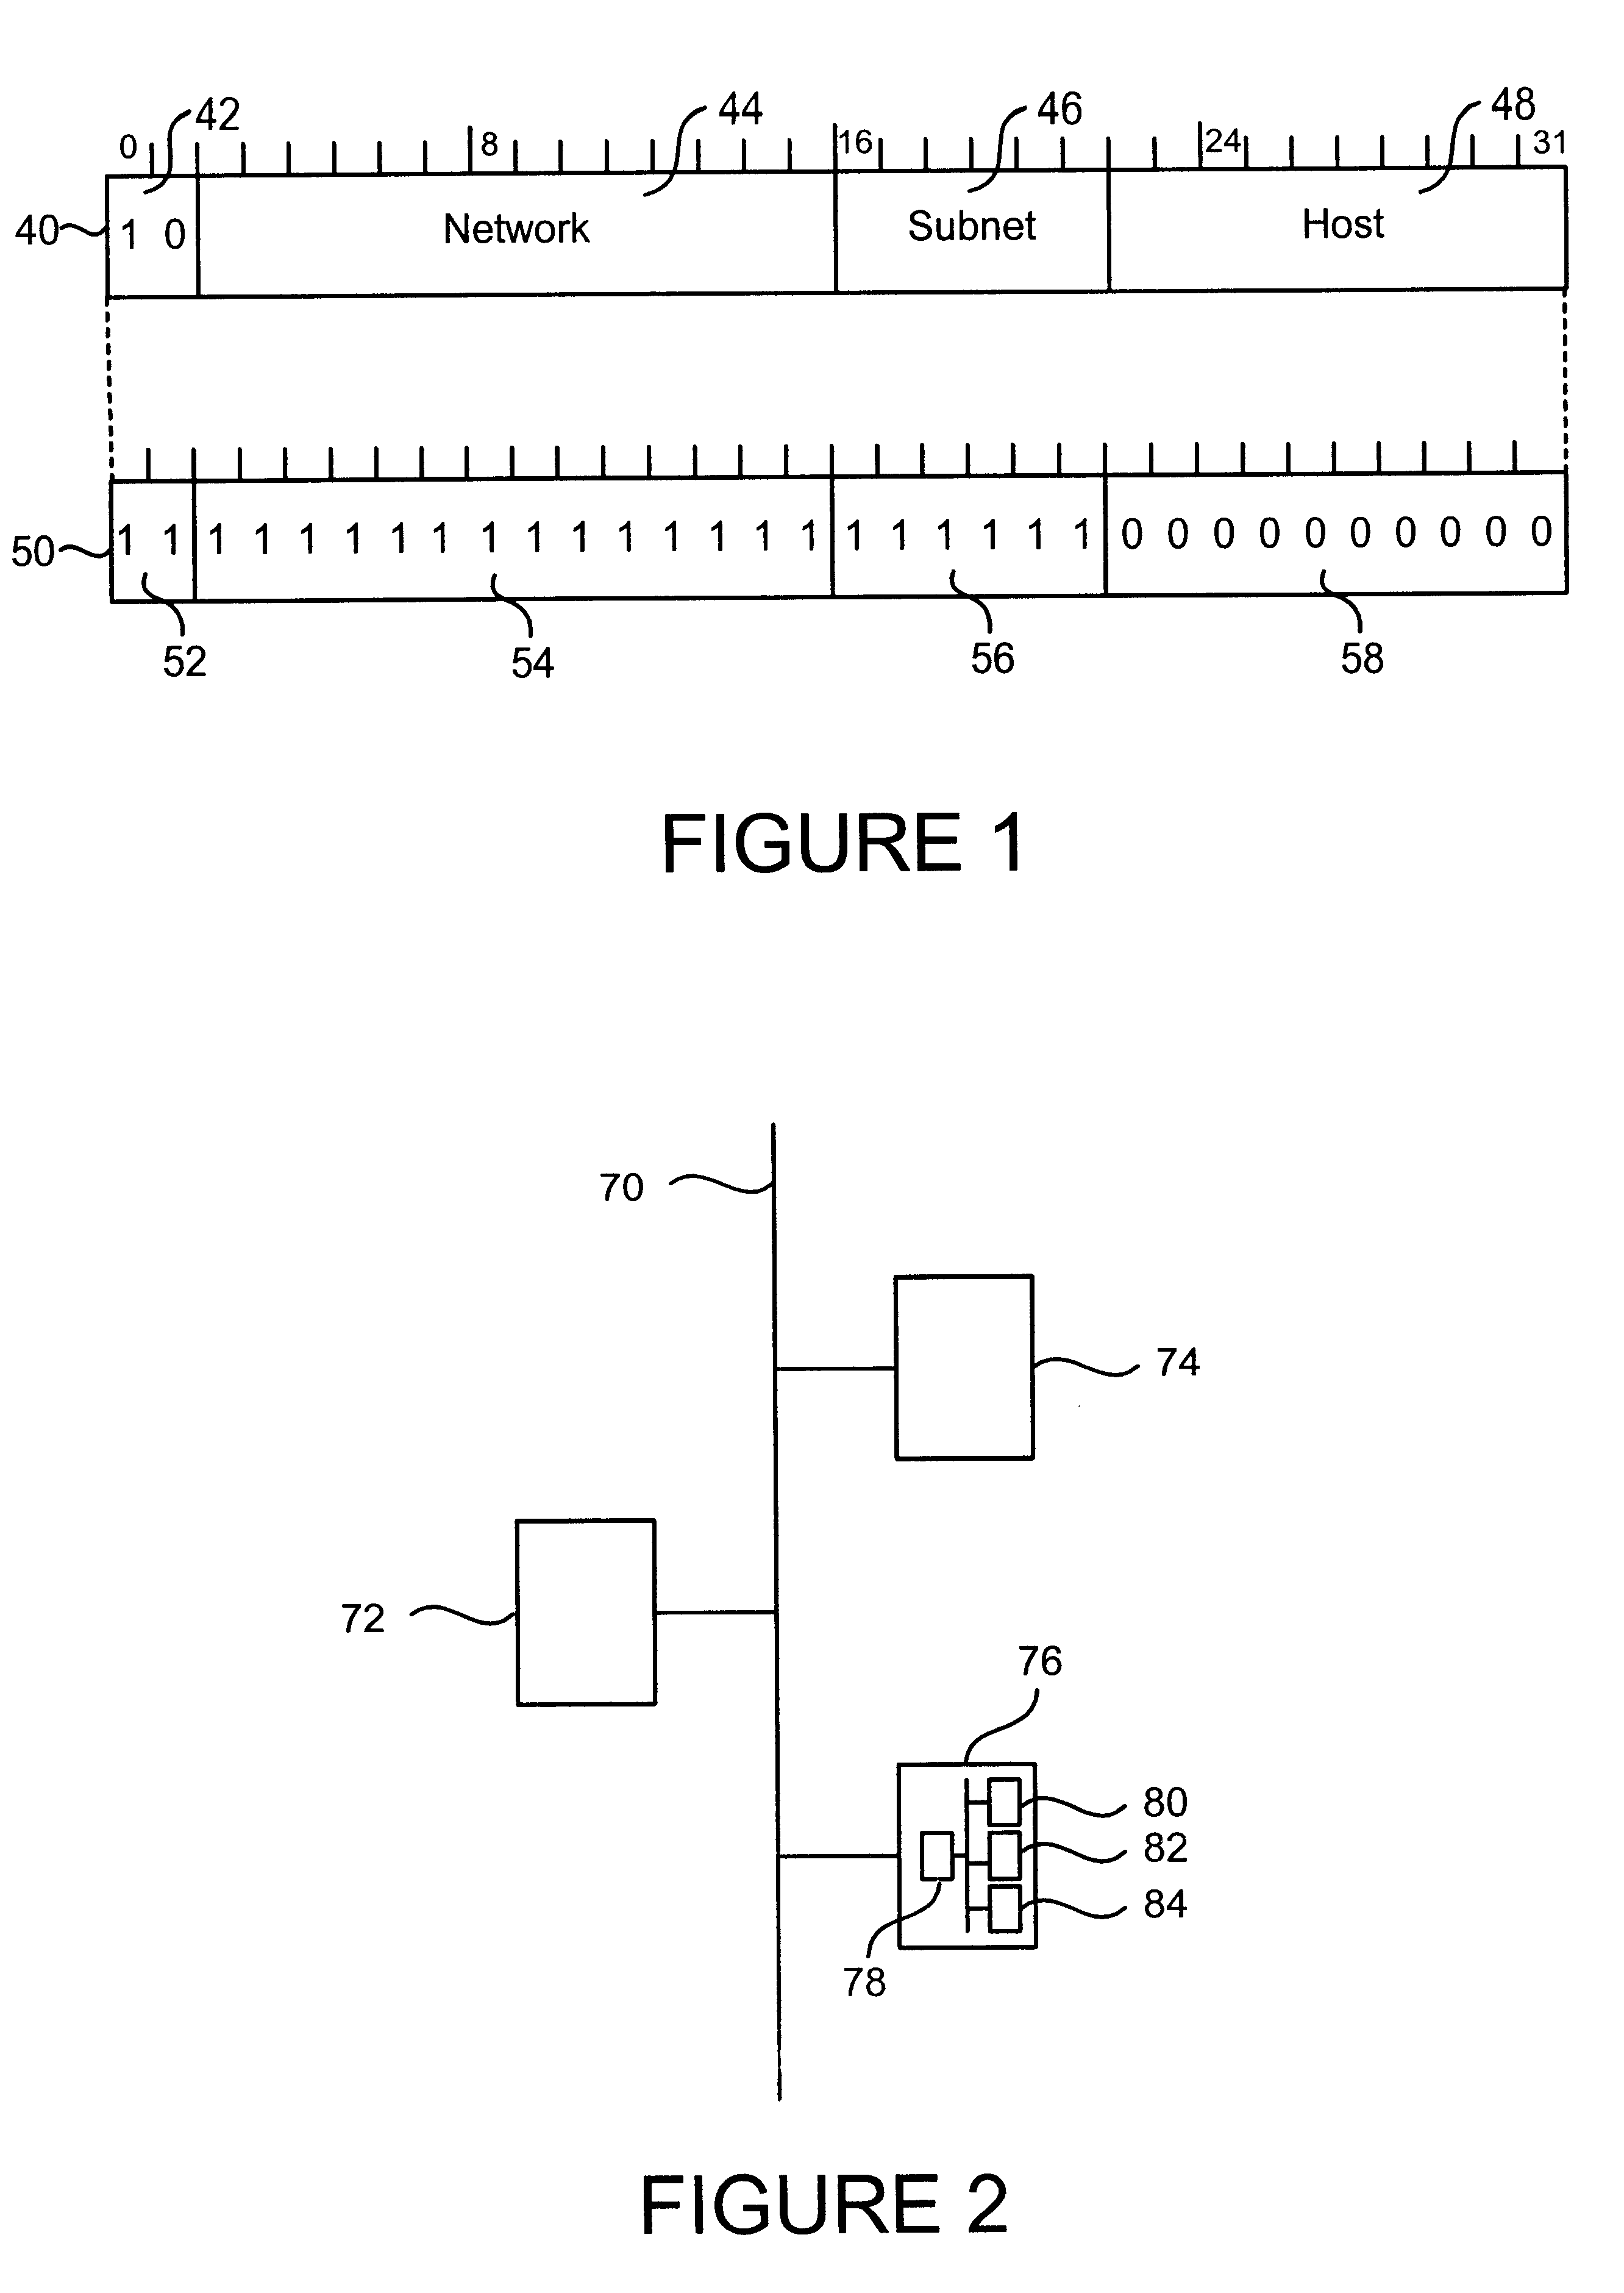 System for automatically determining a network address